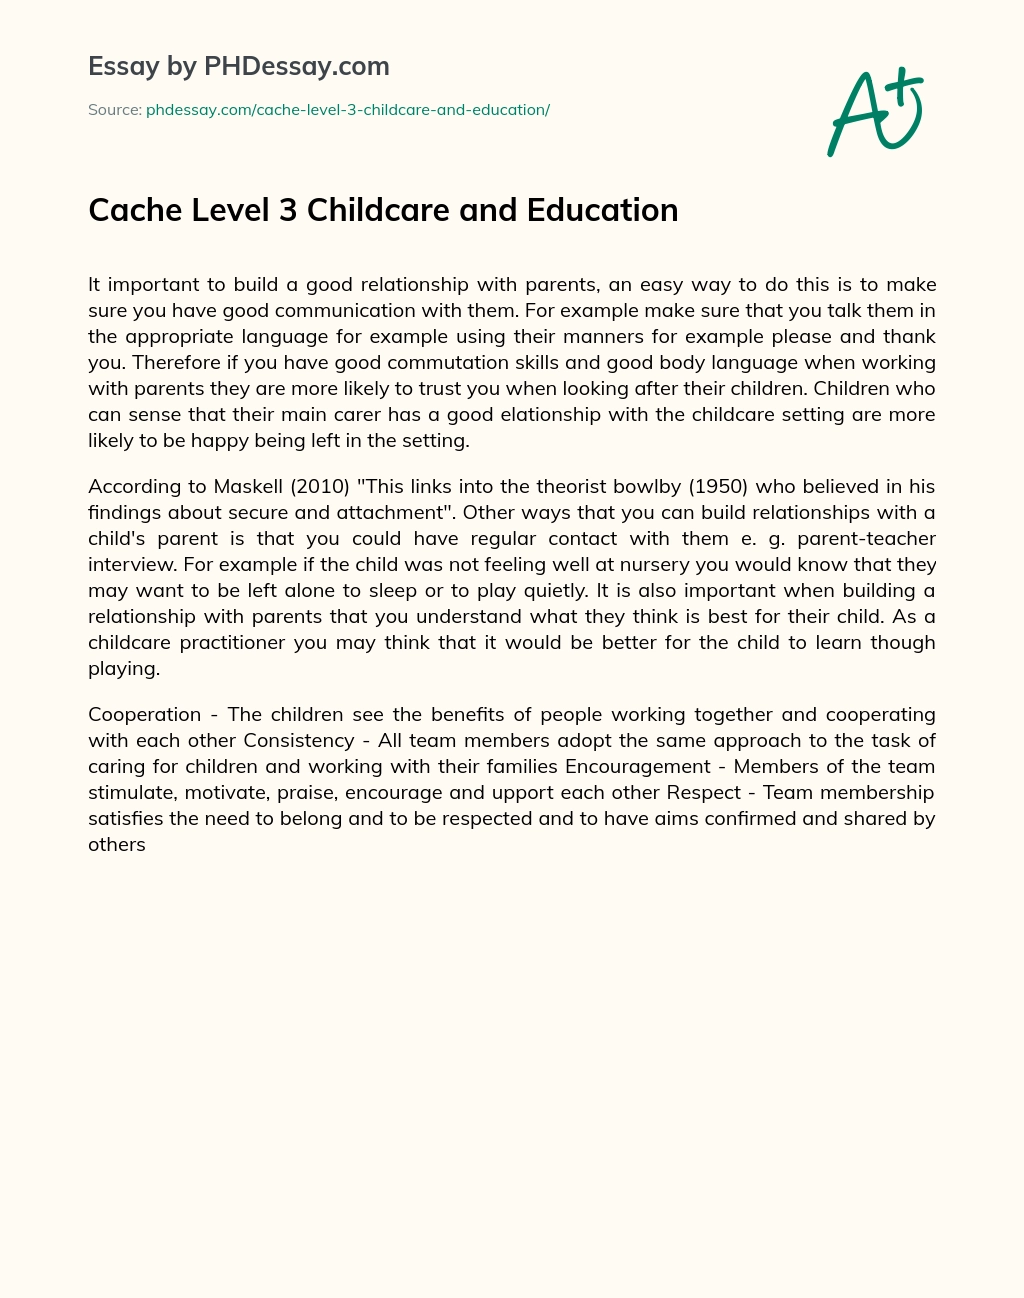 Cache Level 3 Childcare and Education essay